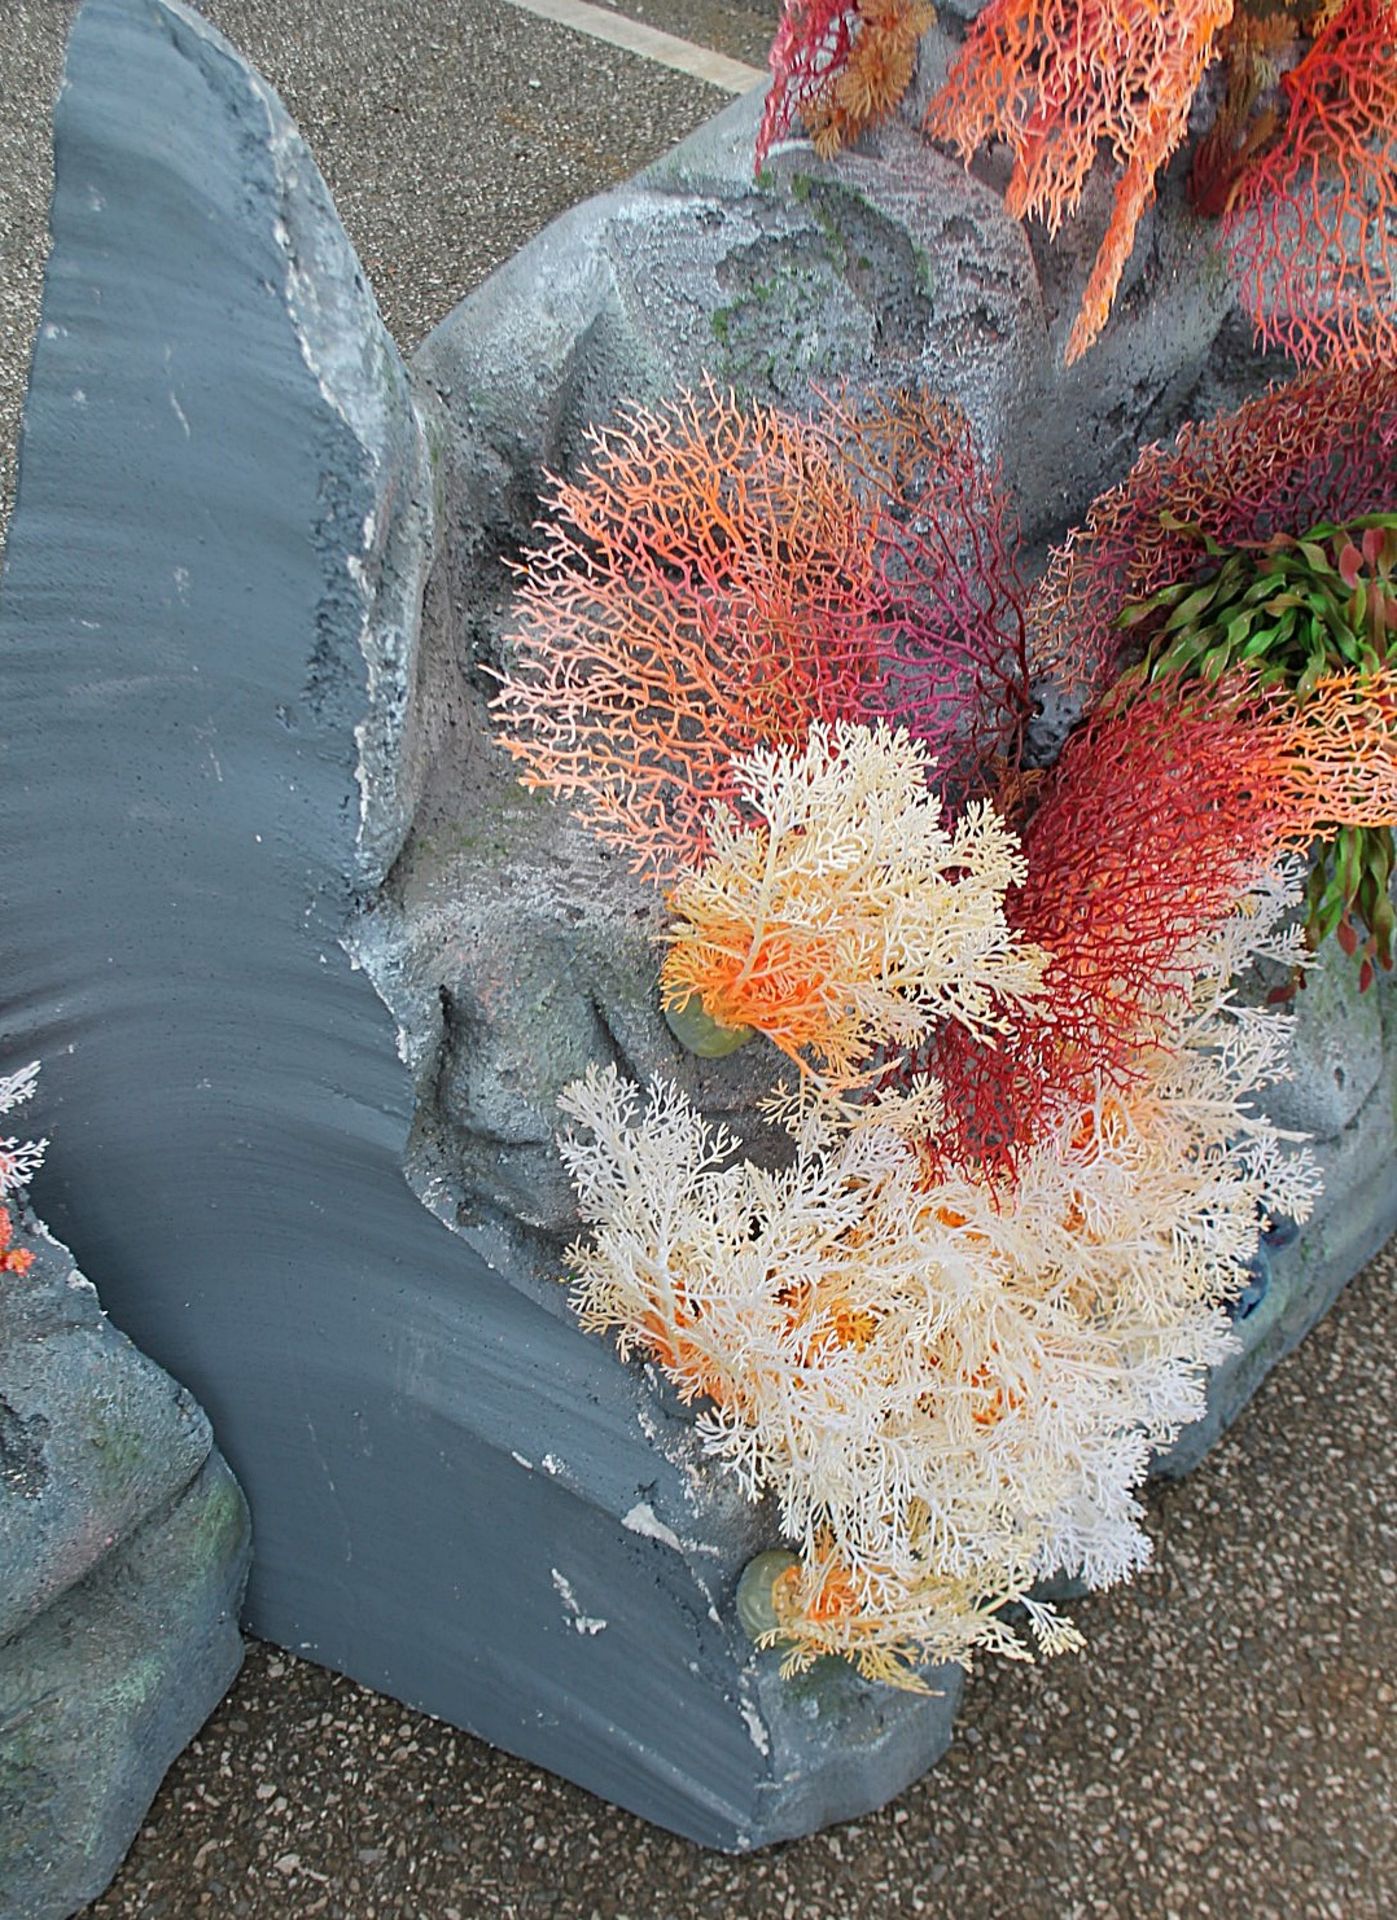 1 x Bespoke Coral Reef Shop Display / Theatre Stage Prop - 2.8 Metres Long - Recently Removed From A - Image 8 of 9